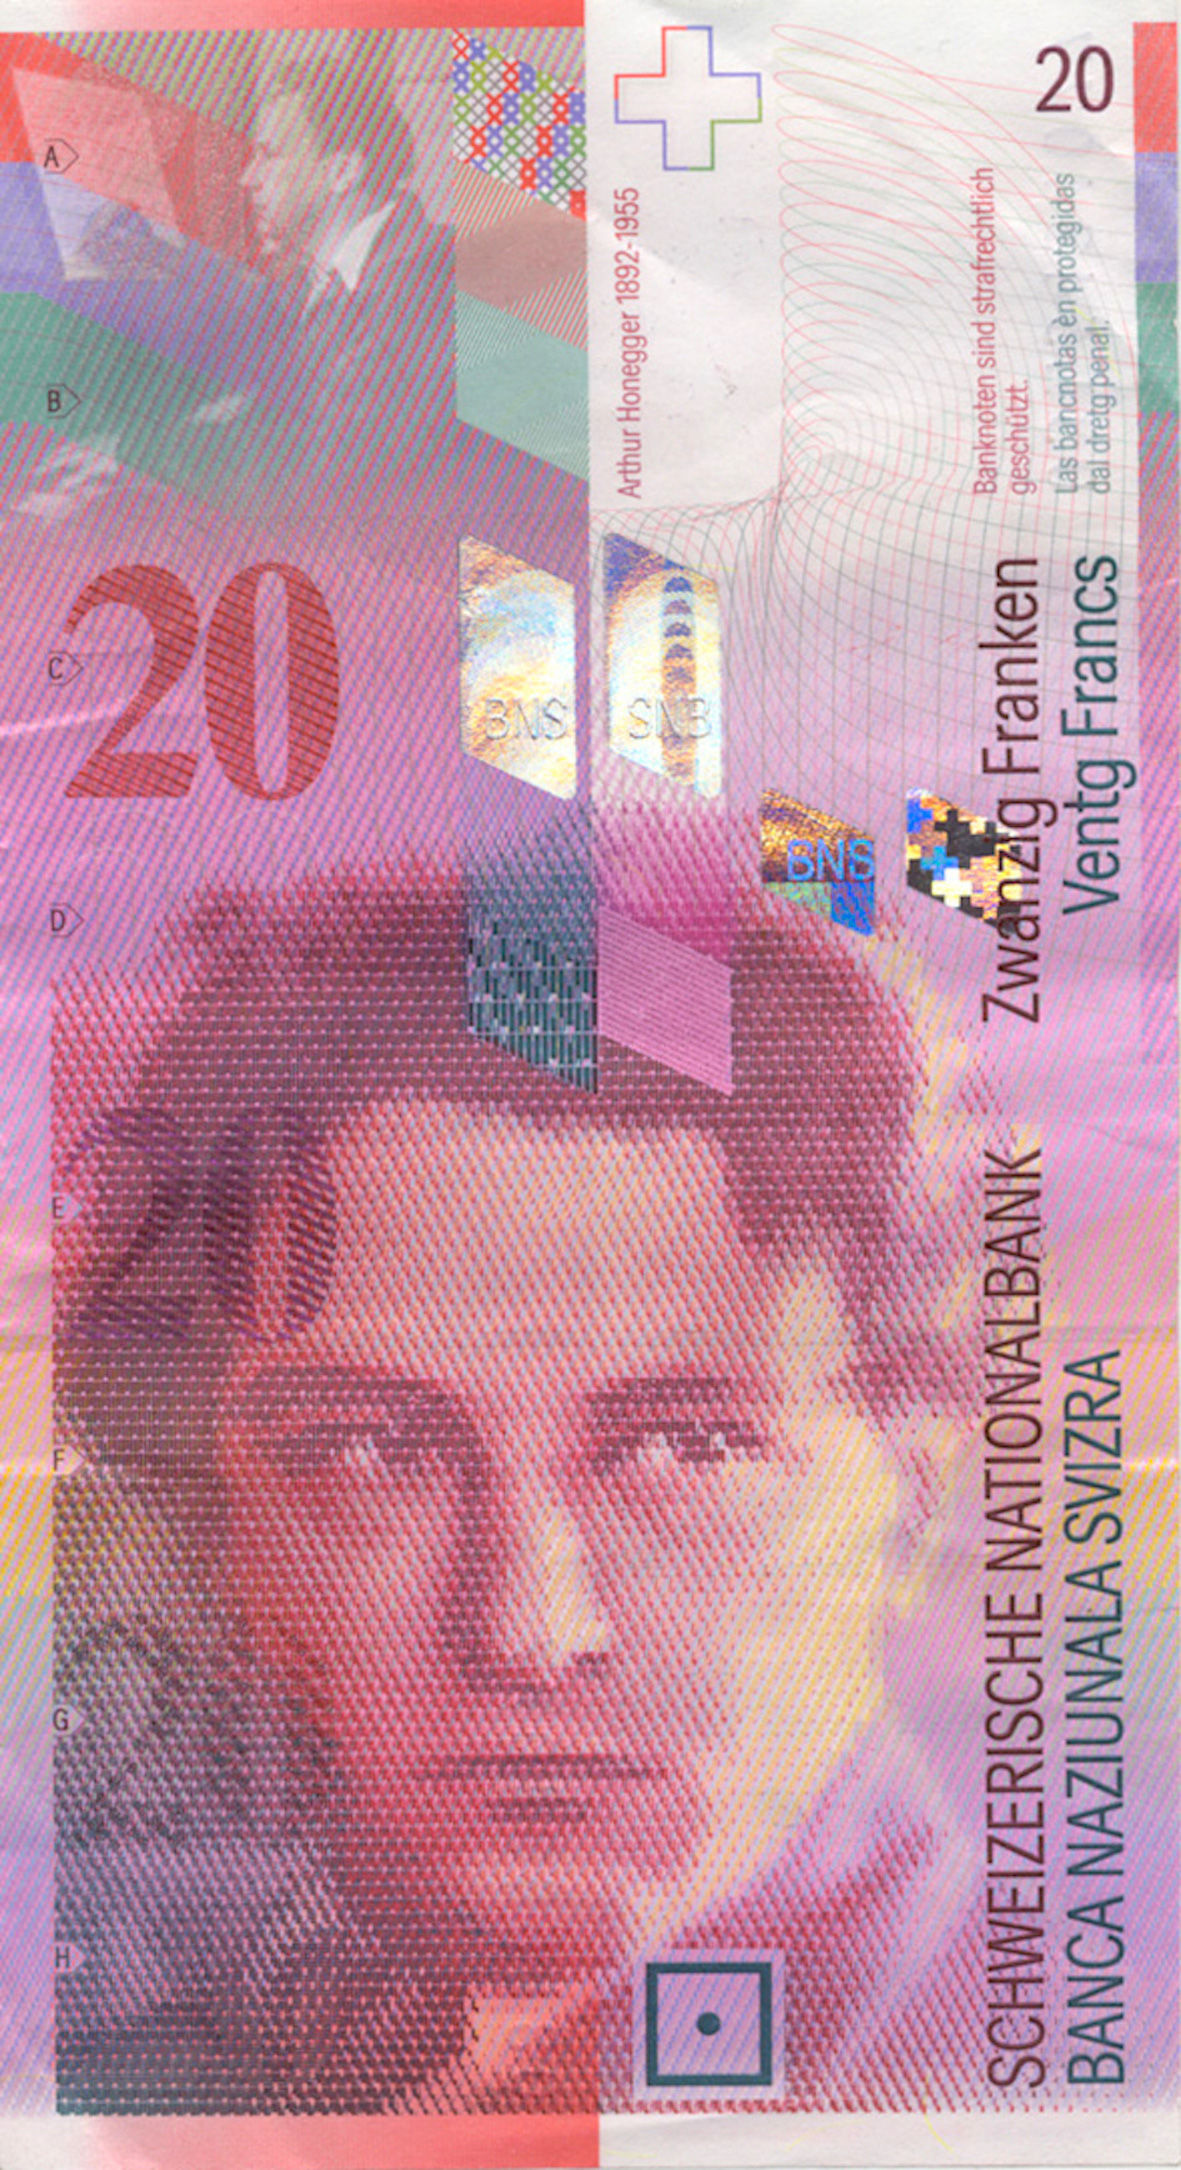 Swiss Confederation, 20 Franks 1980, 8th banknote series, in circulation since 1995 (obverse)